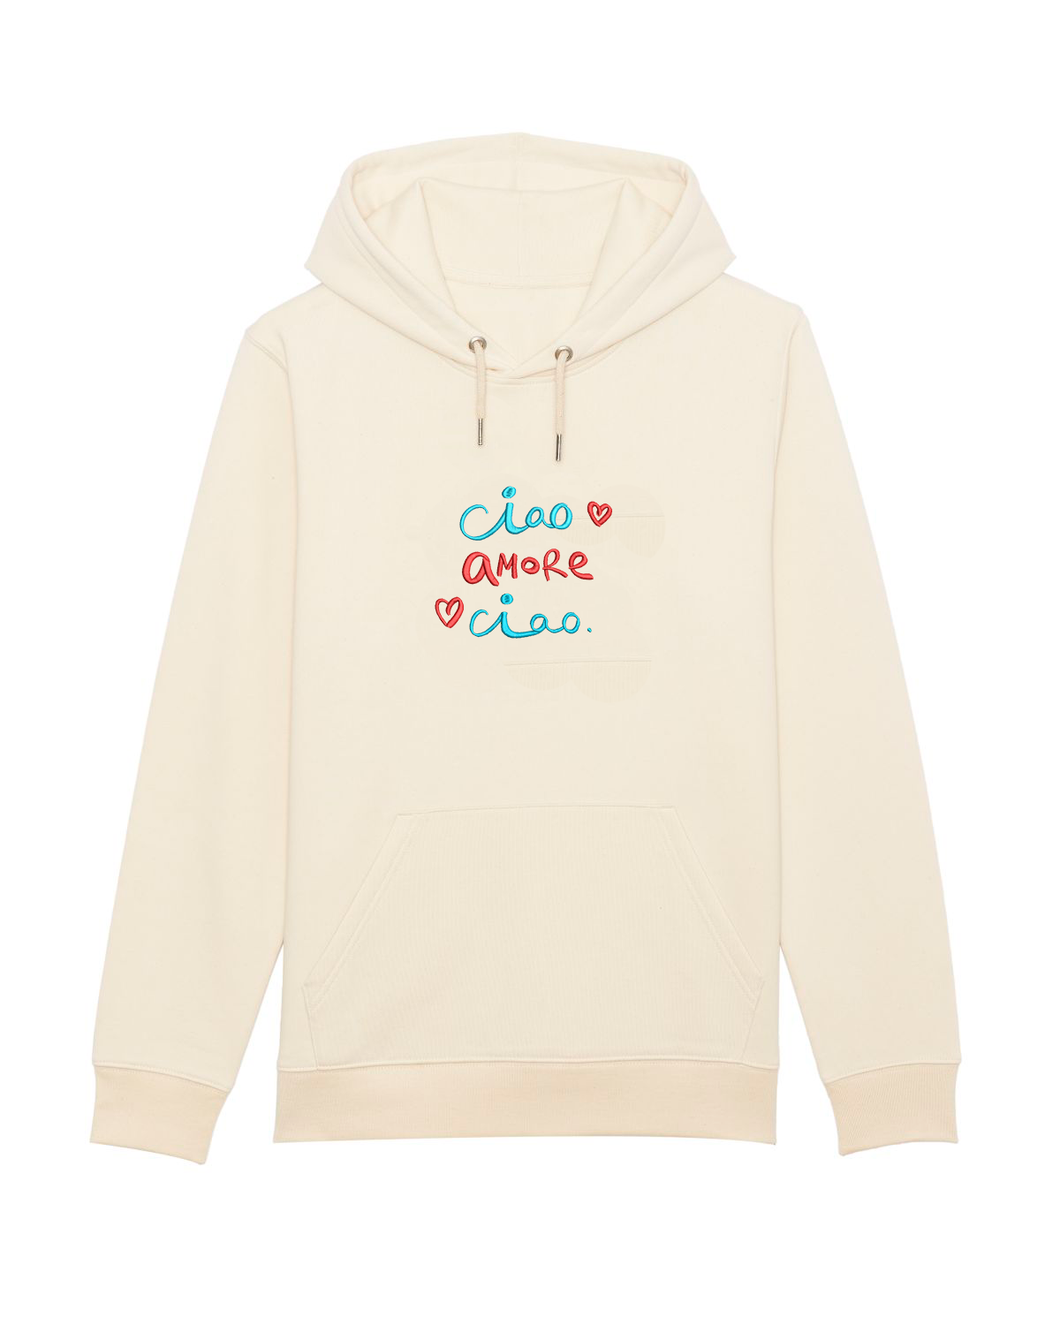 Ciao AMORE Ciao ❤️ - Embroidered UNISEX hoodie